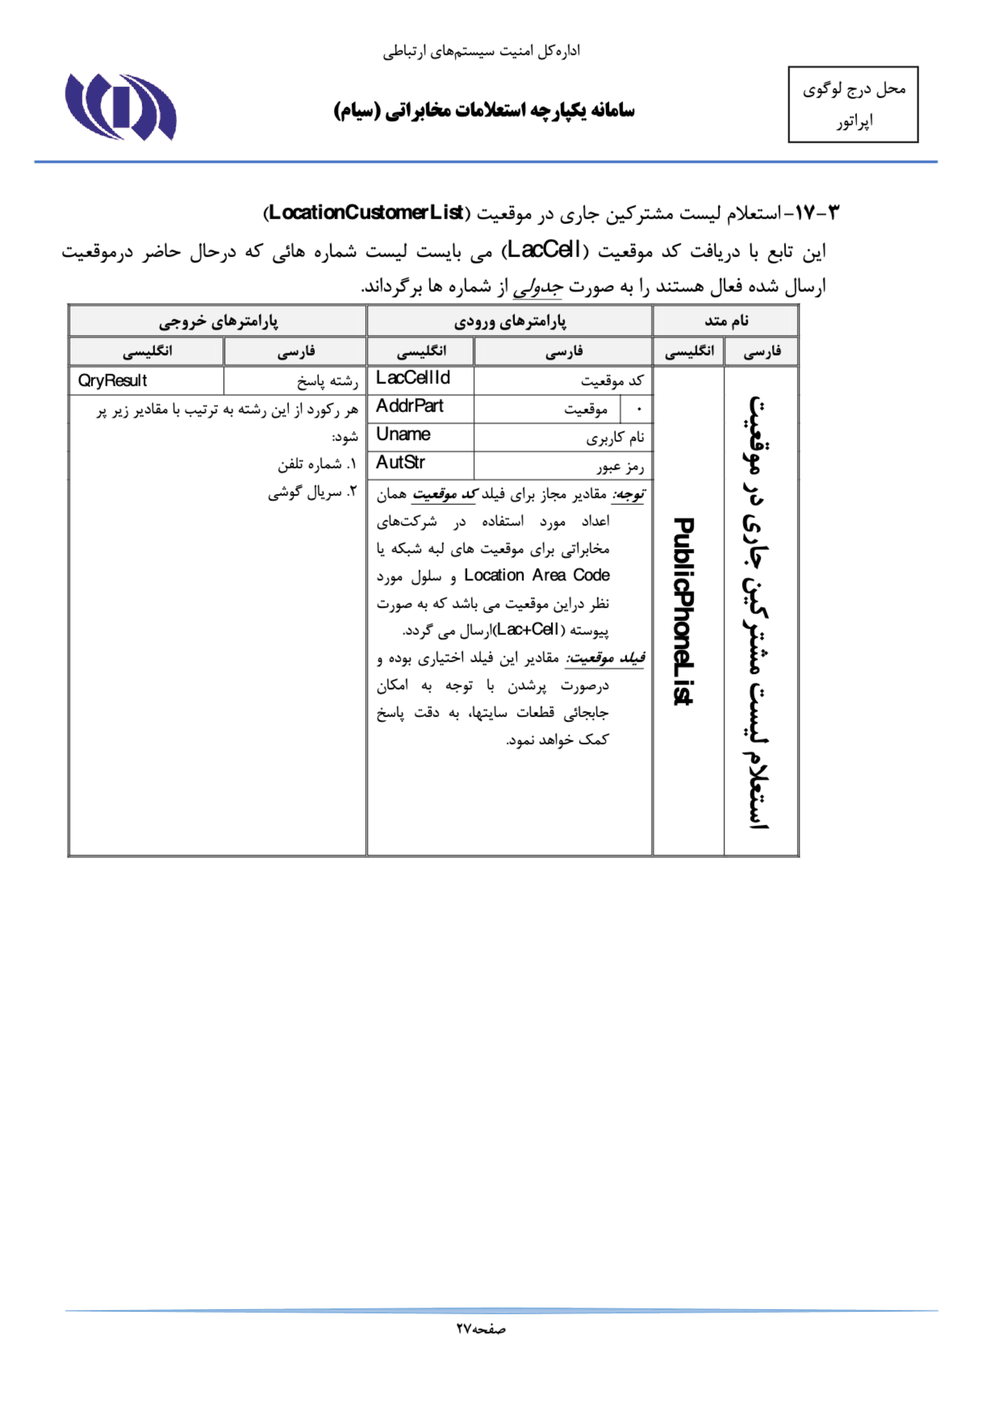 Page 27 from Iran’s SIAM Manual in Persian for Tracking and Controlling Mobile Phones